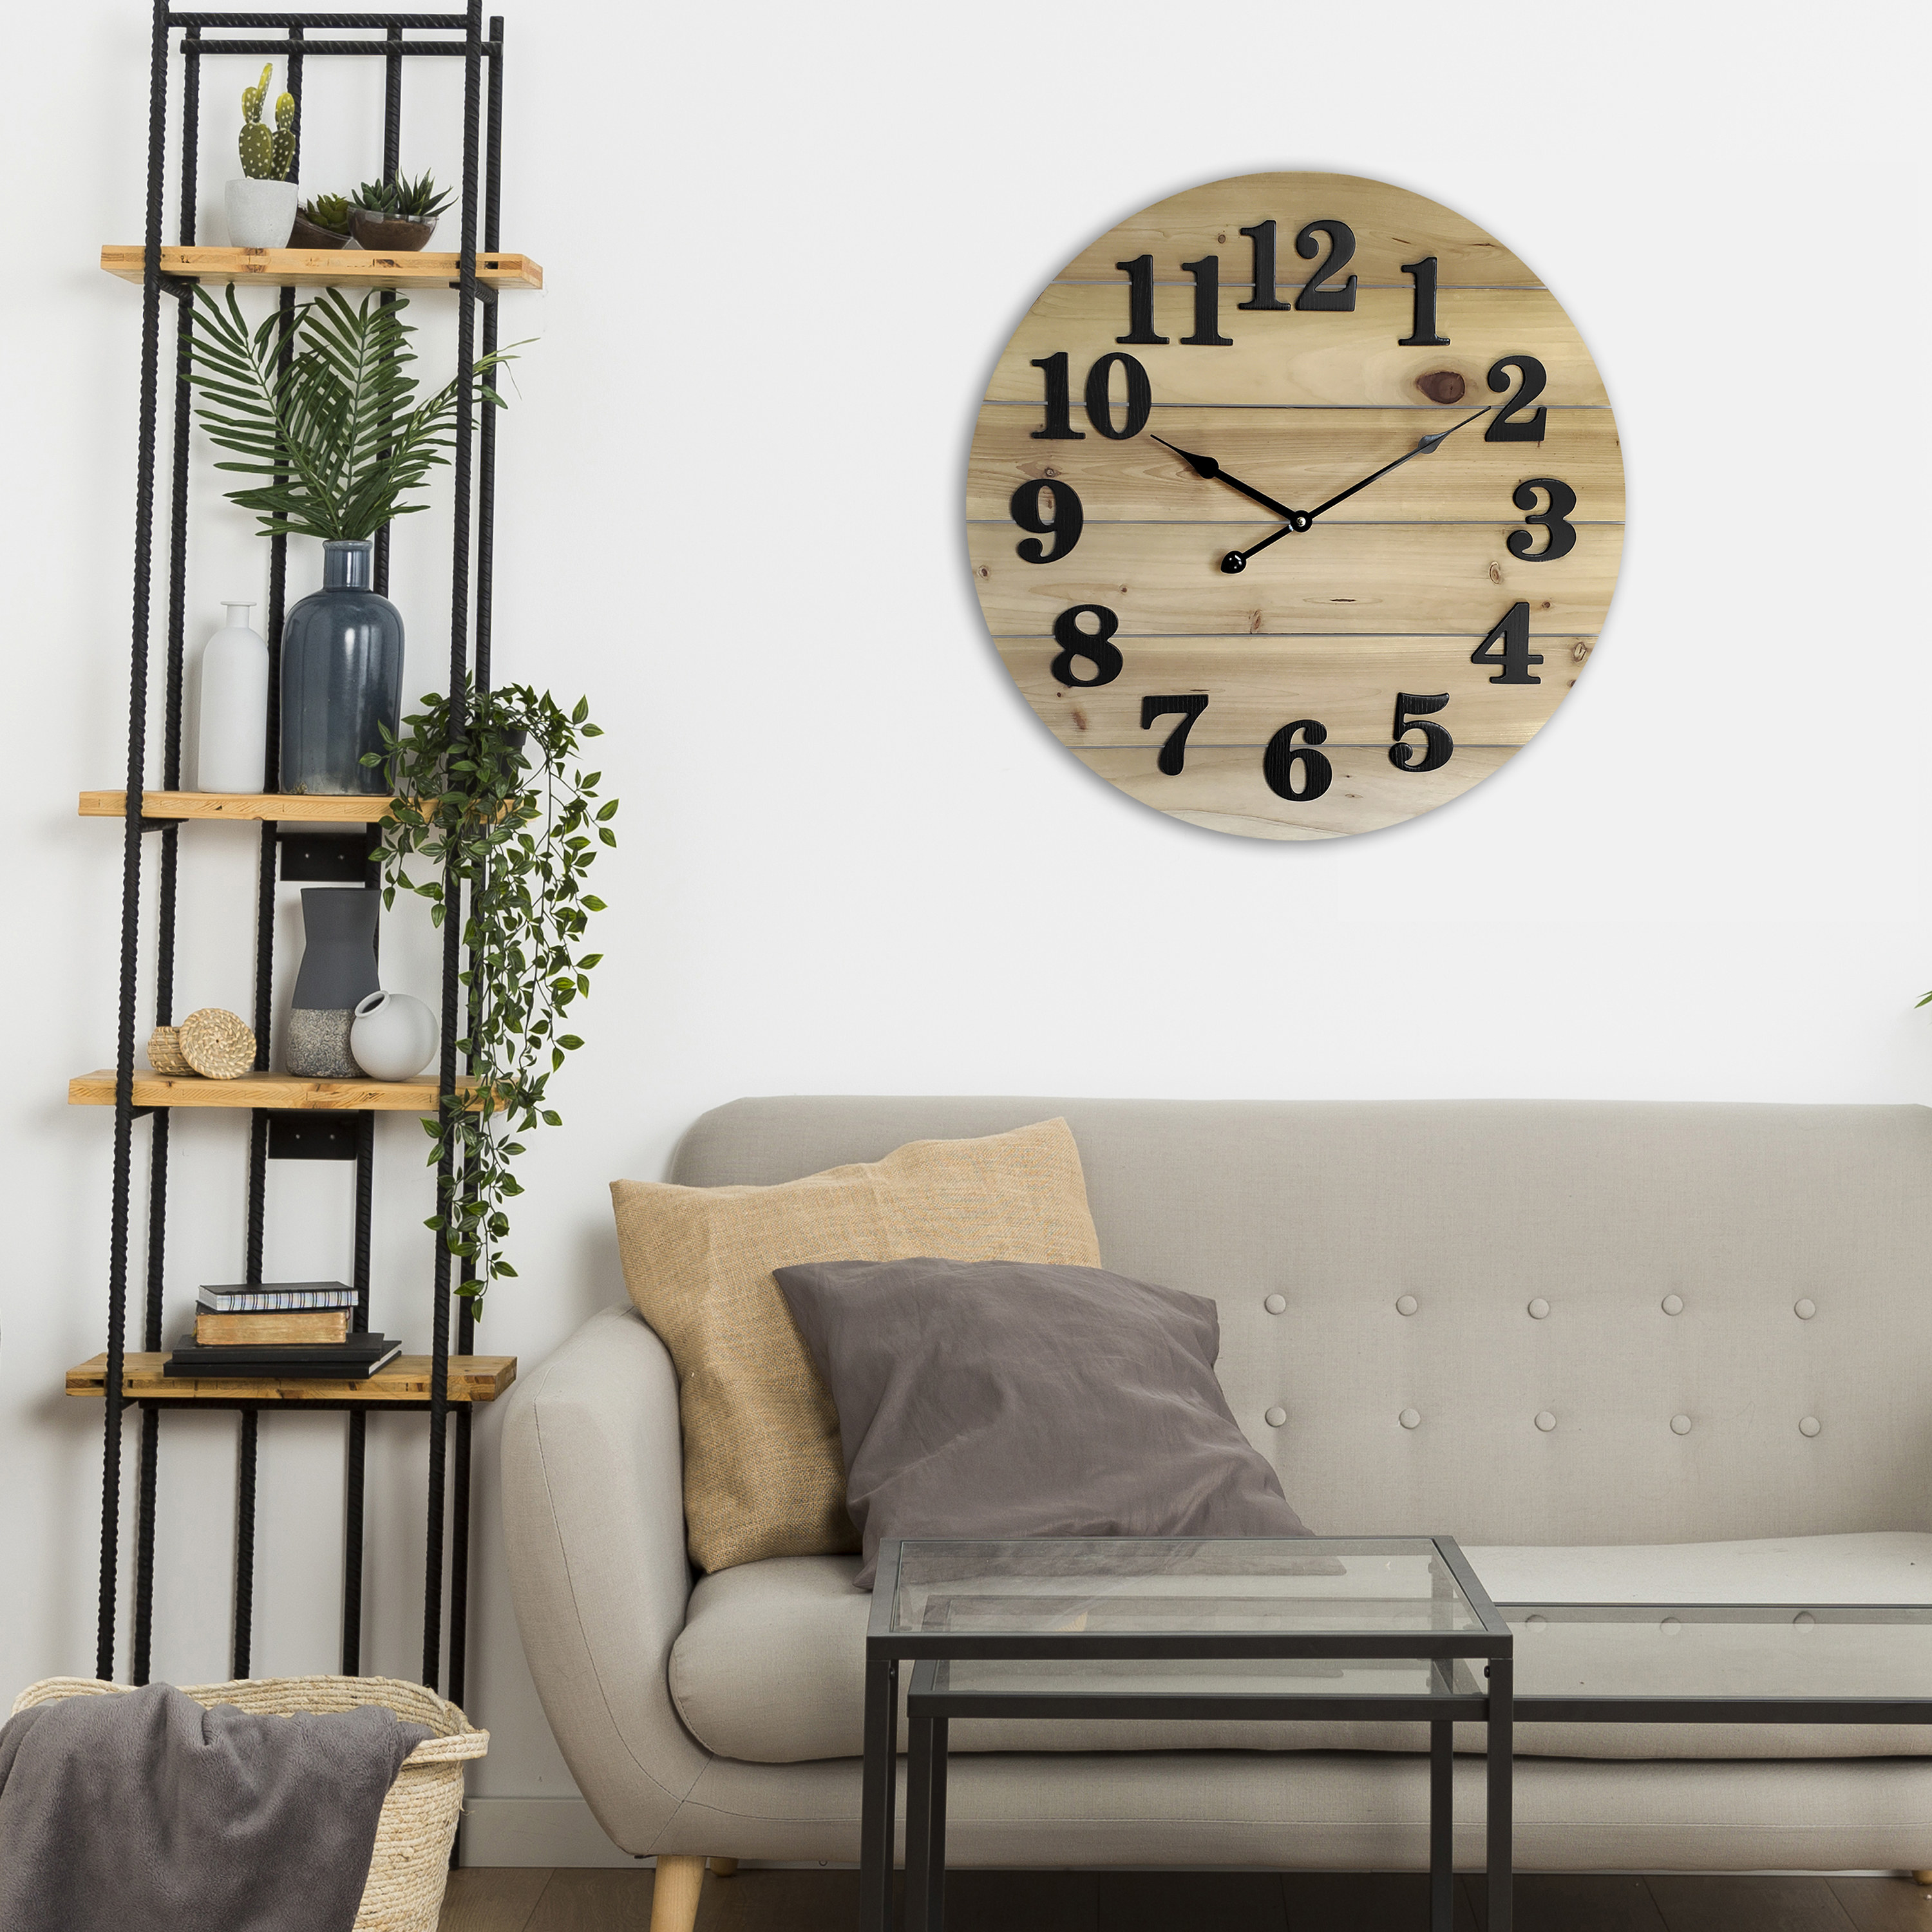 the large wooden clock on a living room wall